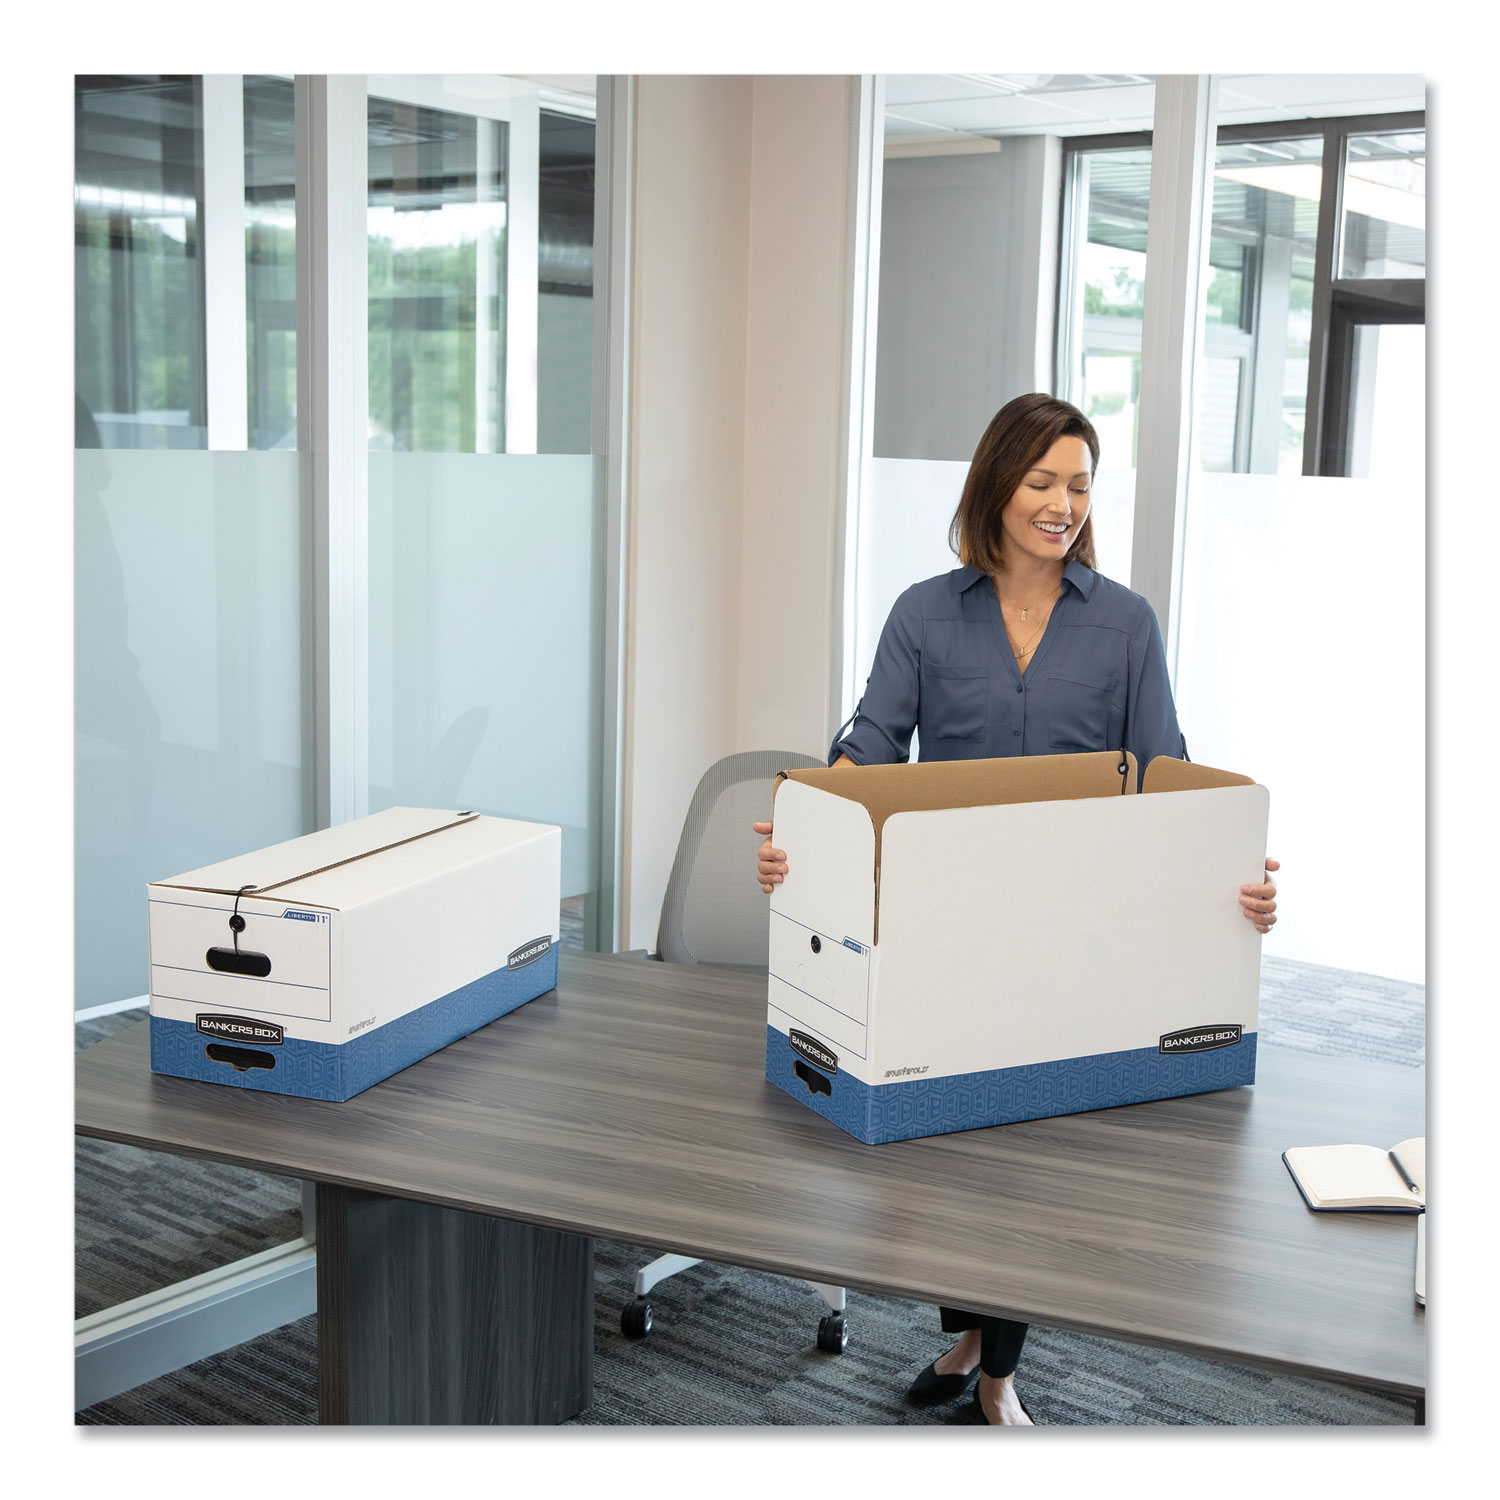 Bankers Box StorFile Standard Duty Storage Boxes With Lift Off Lids And  Built In Handles LetterLegal Size 10 x 12 x 15 WhiteBlue Case Of 13 -  Office Depot